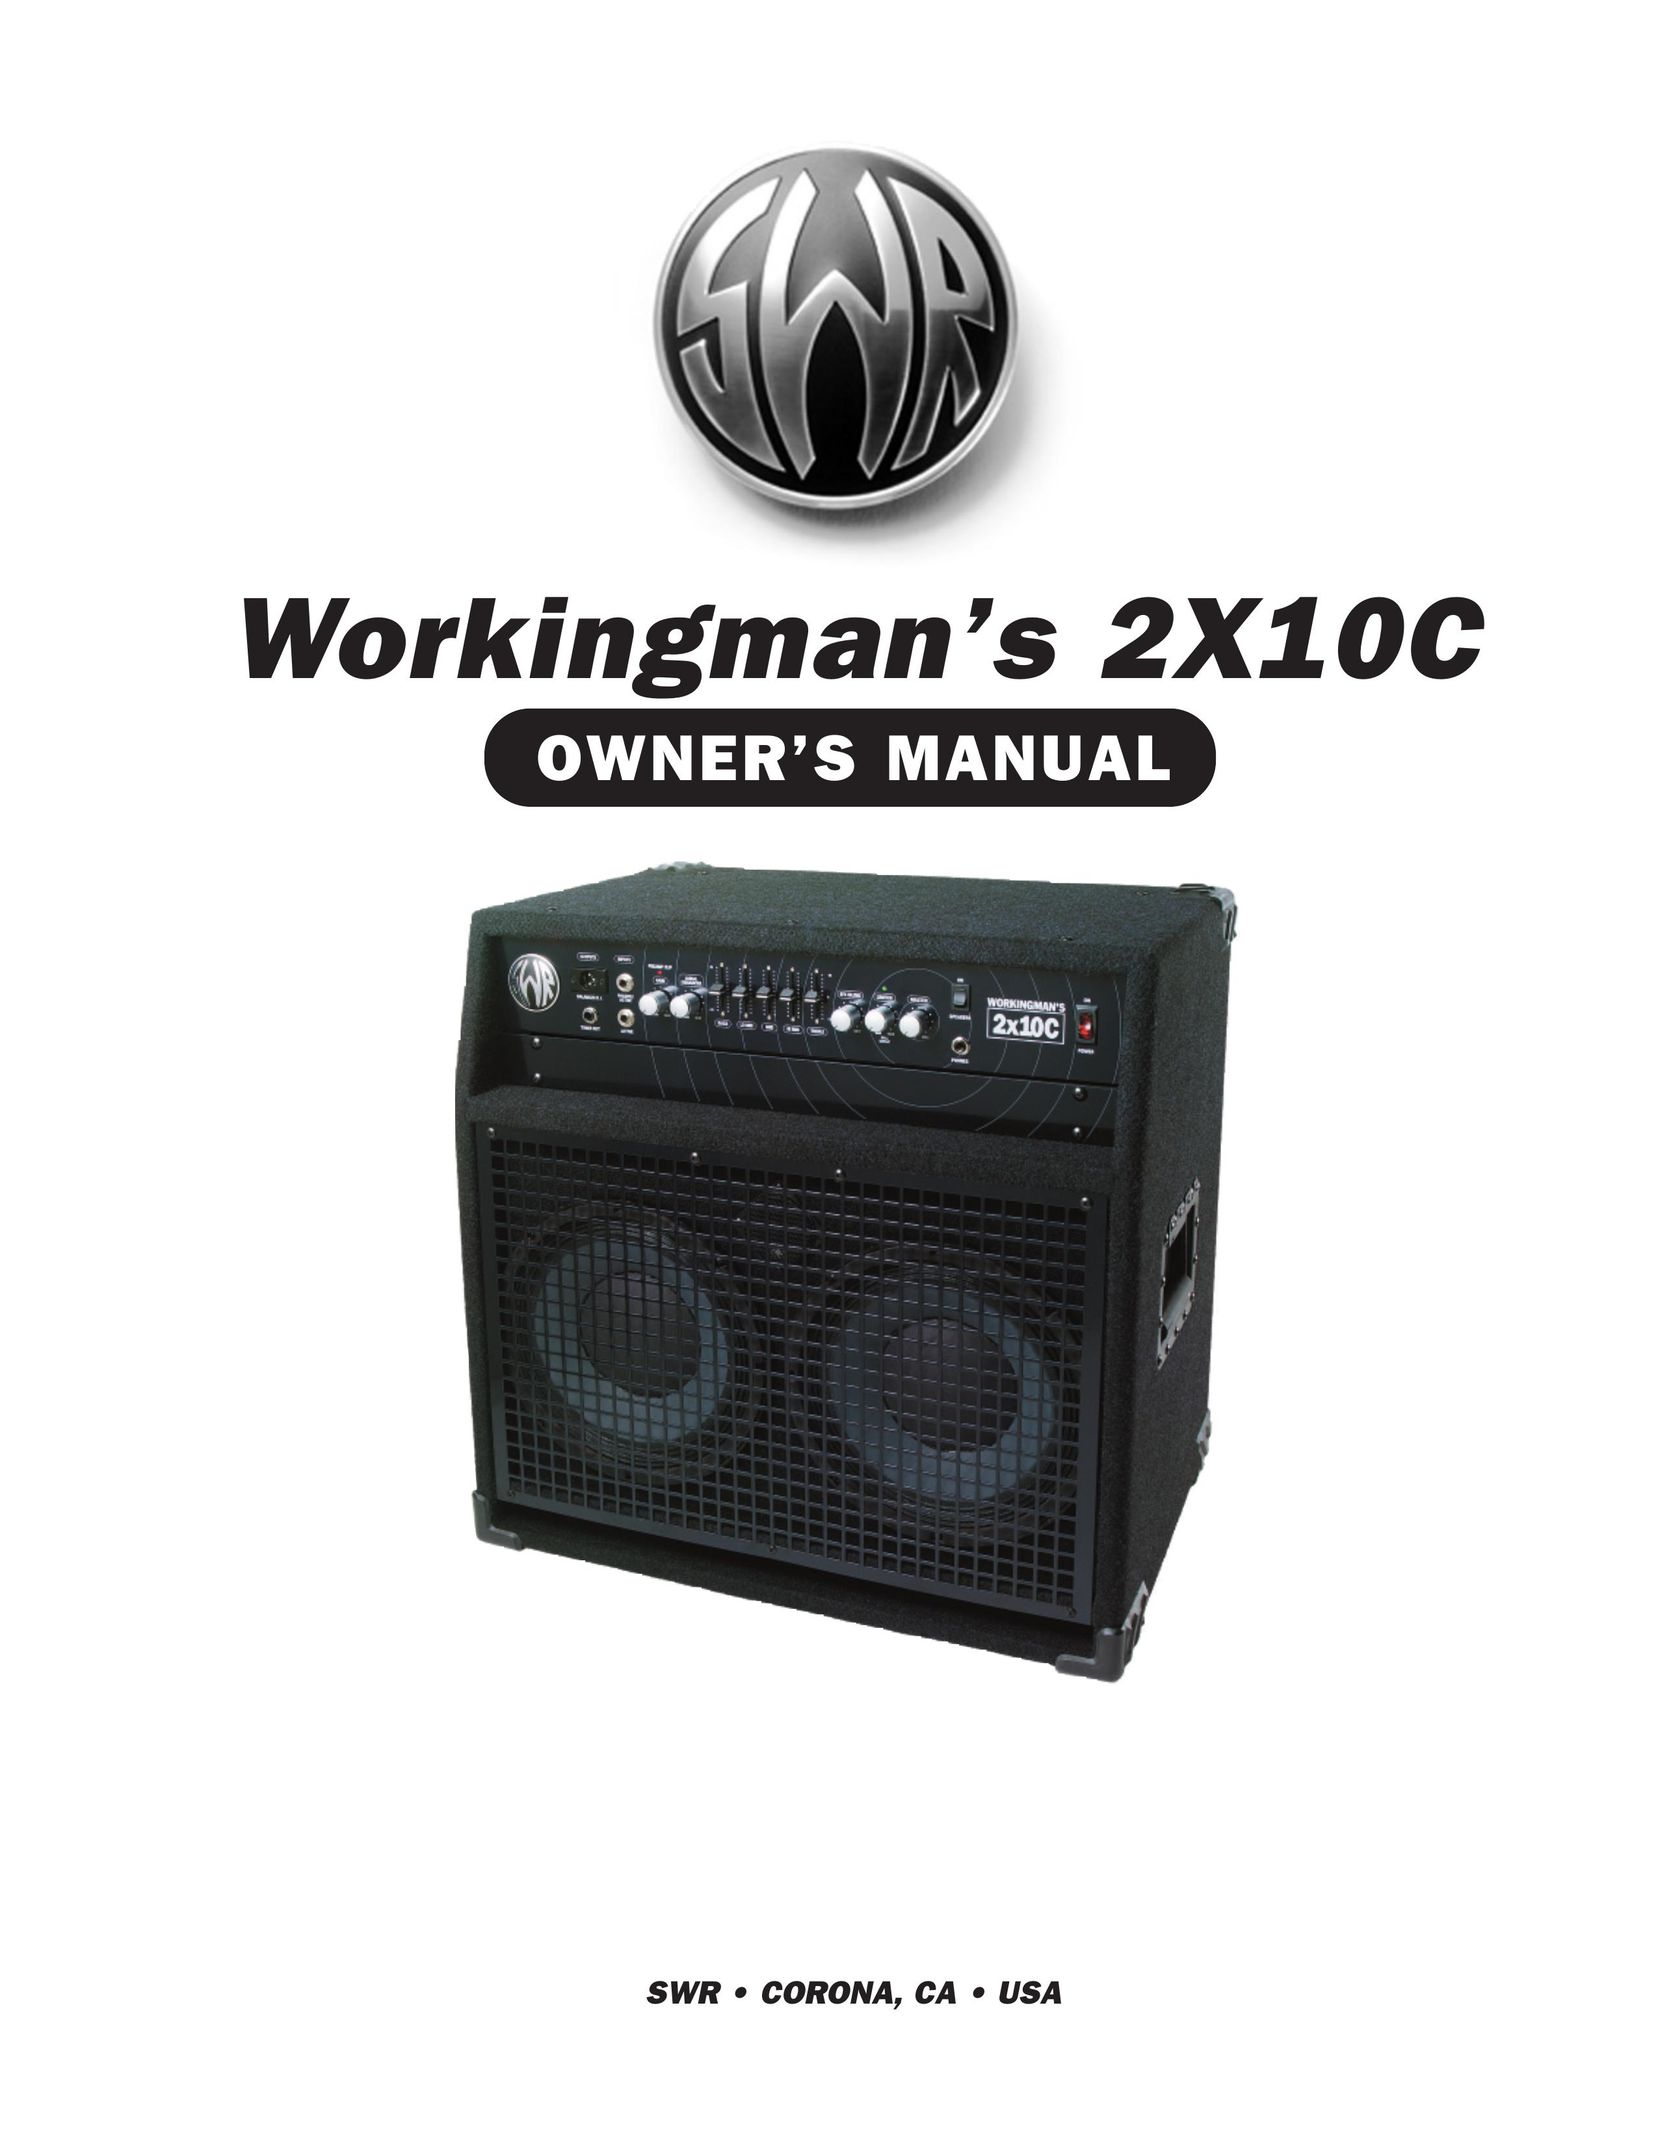 SWR Sound 2X10C Stereo Amplifier User Manual